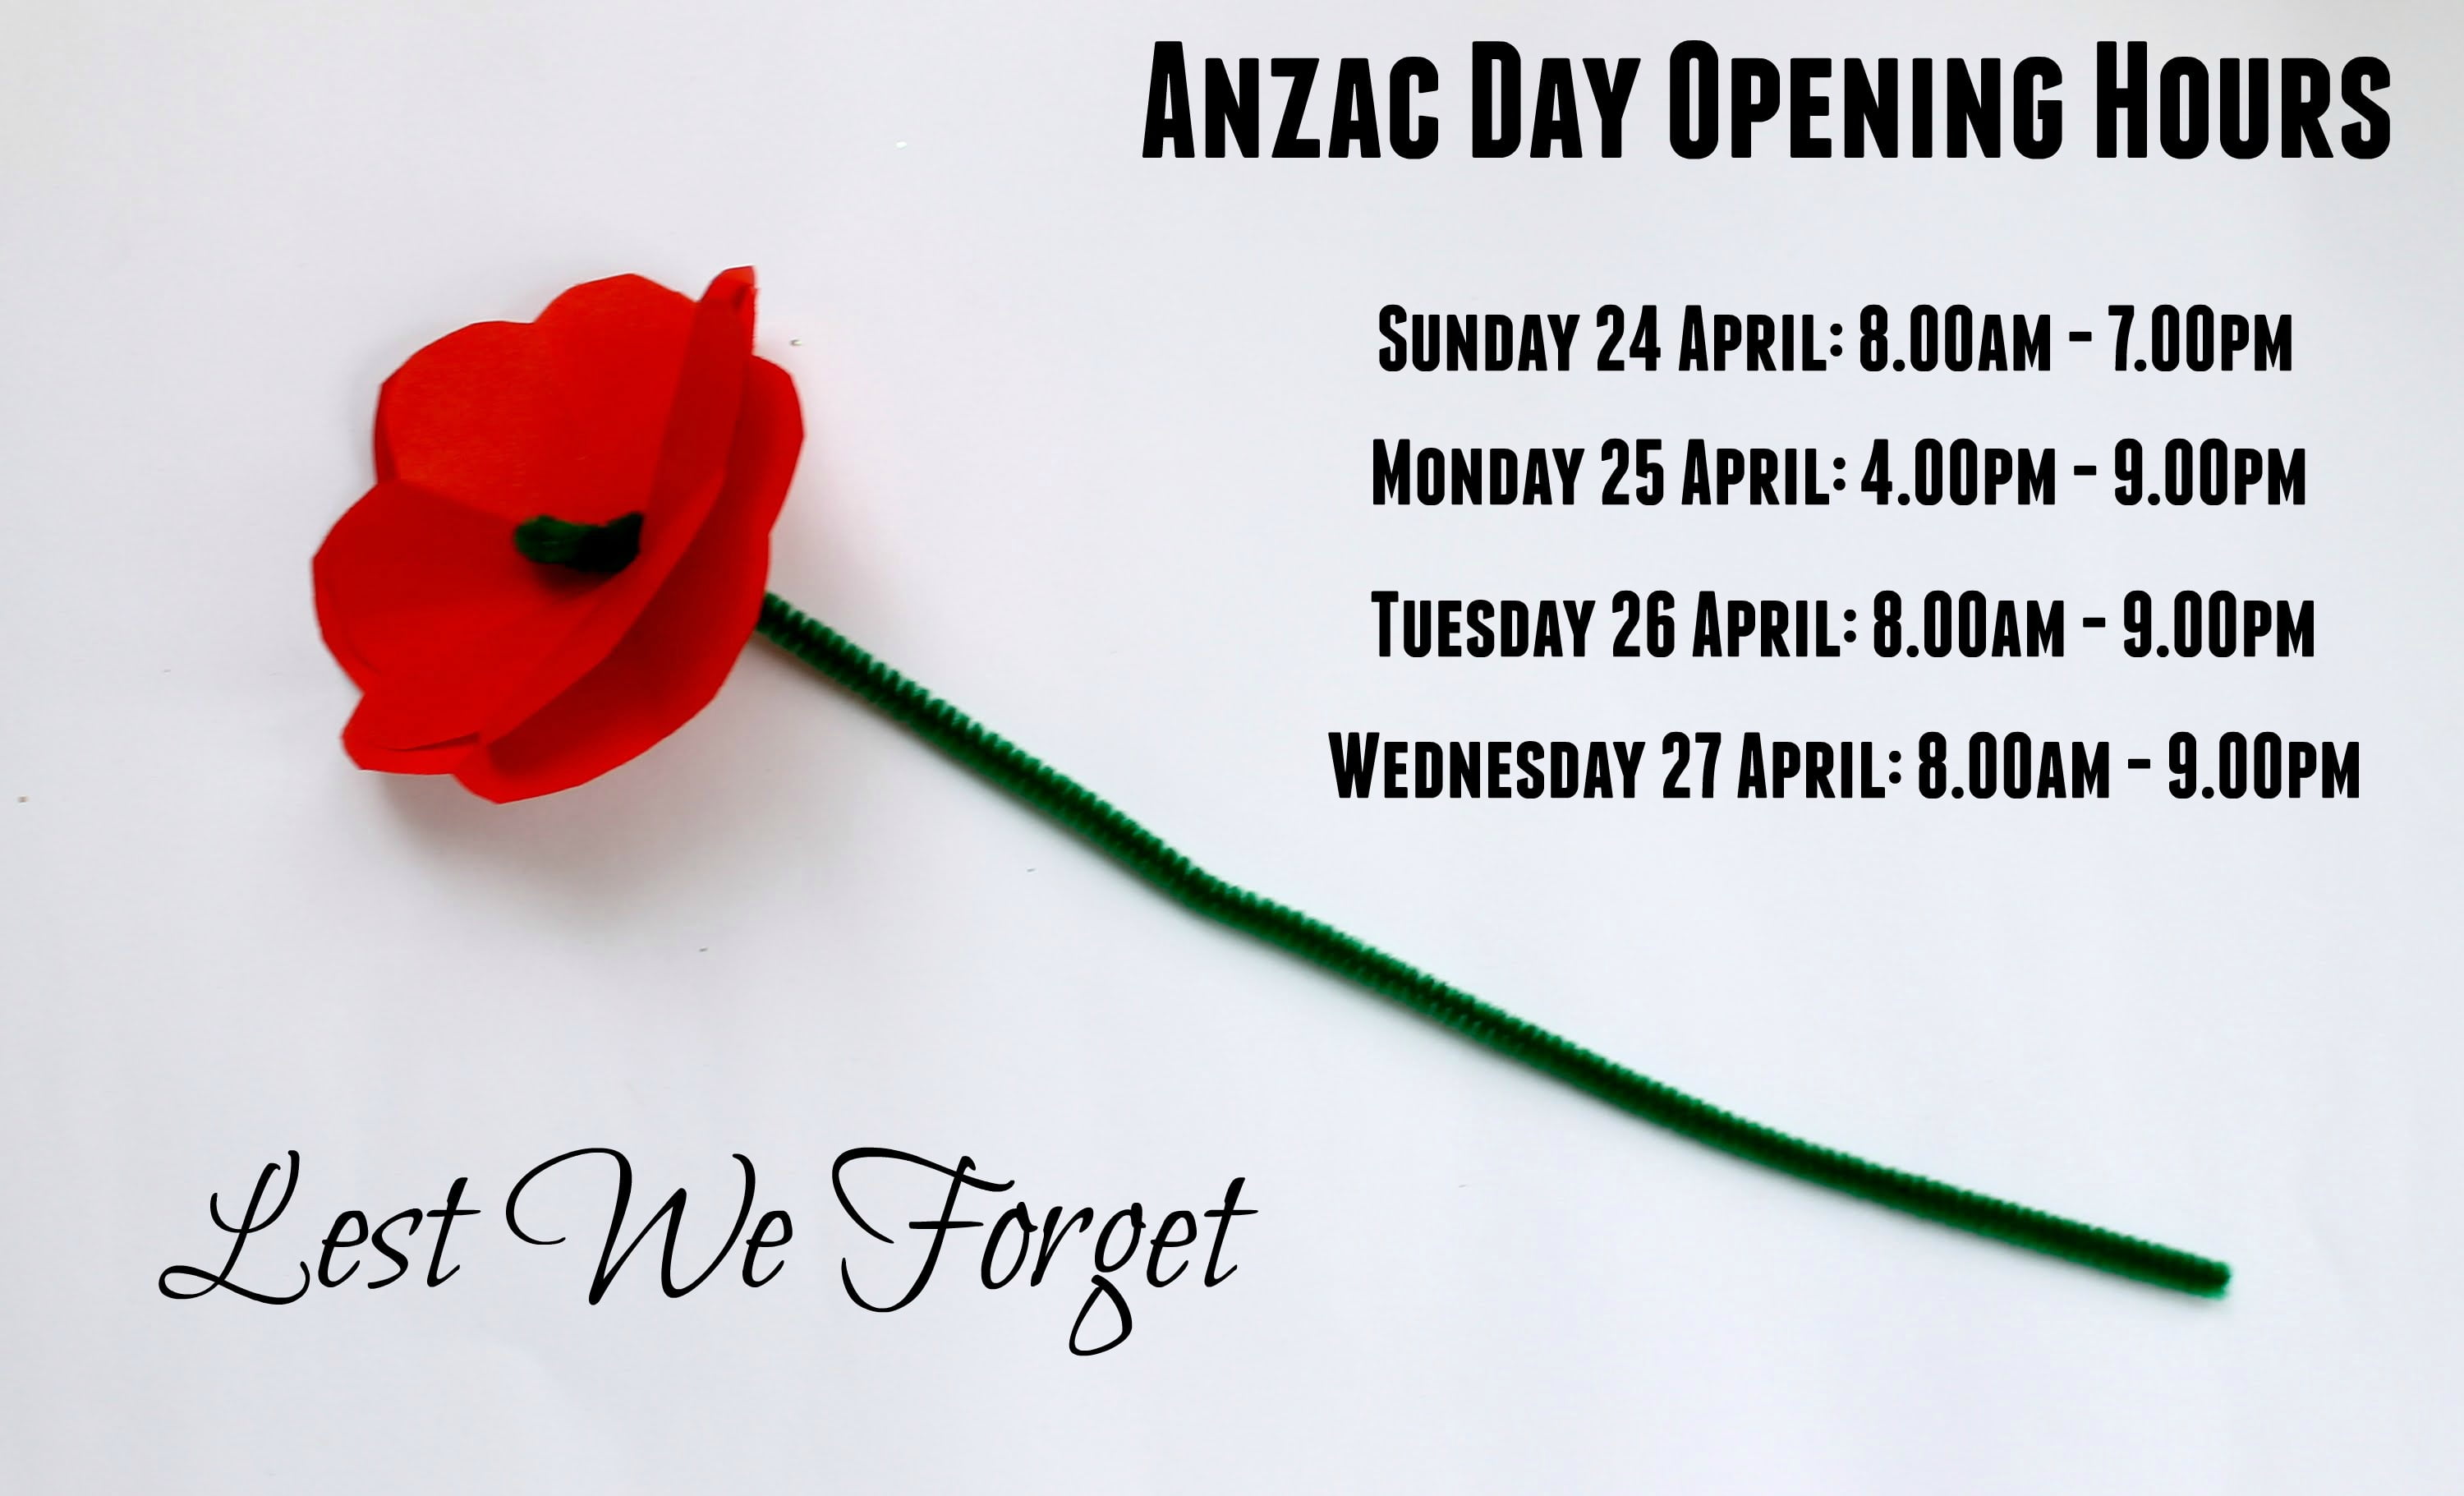 Anzac day opening hours law - no-hype options trading pdf download